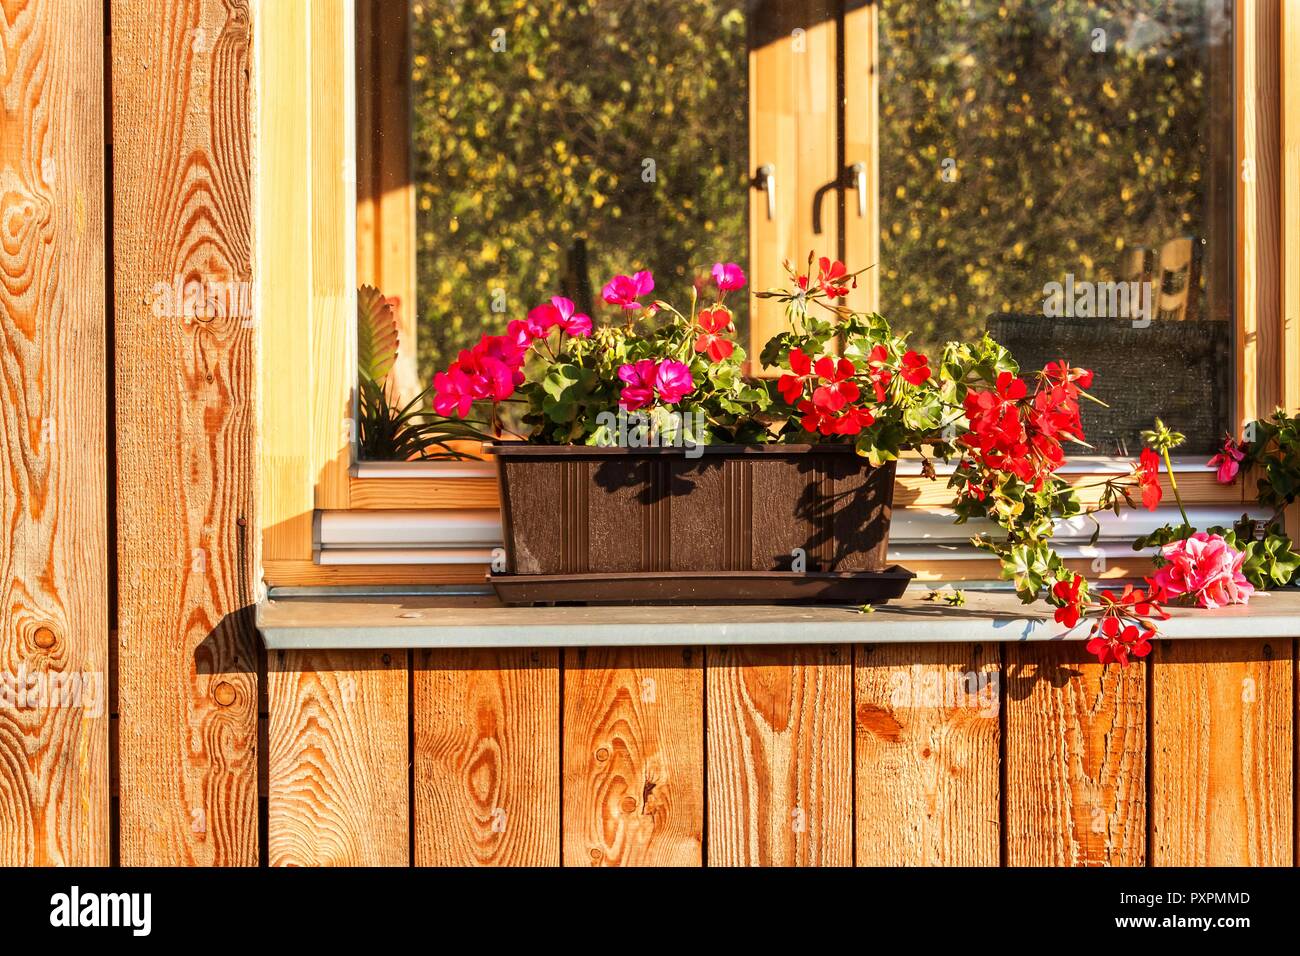 Small purple and red flowers are blooming on the plot at the window still. Evening autumn light. Wooden eco-house Stock Photo